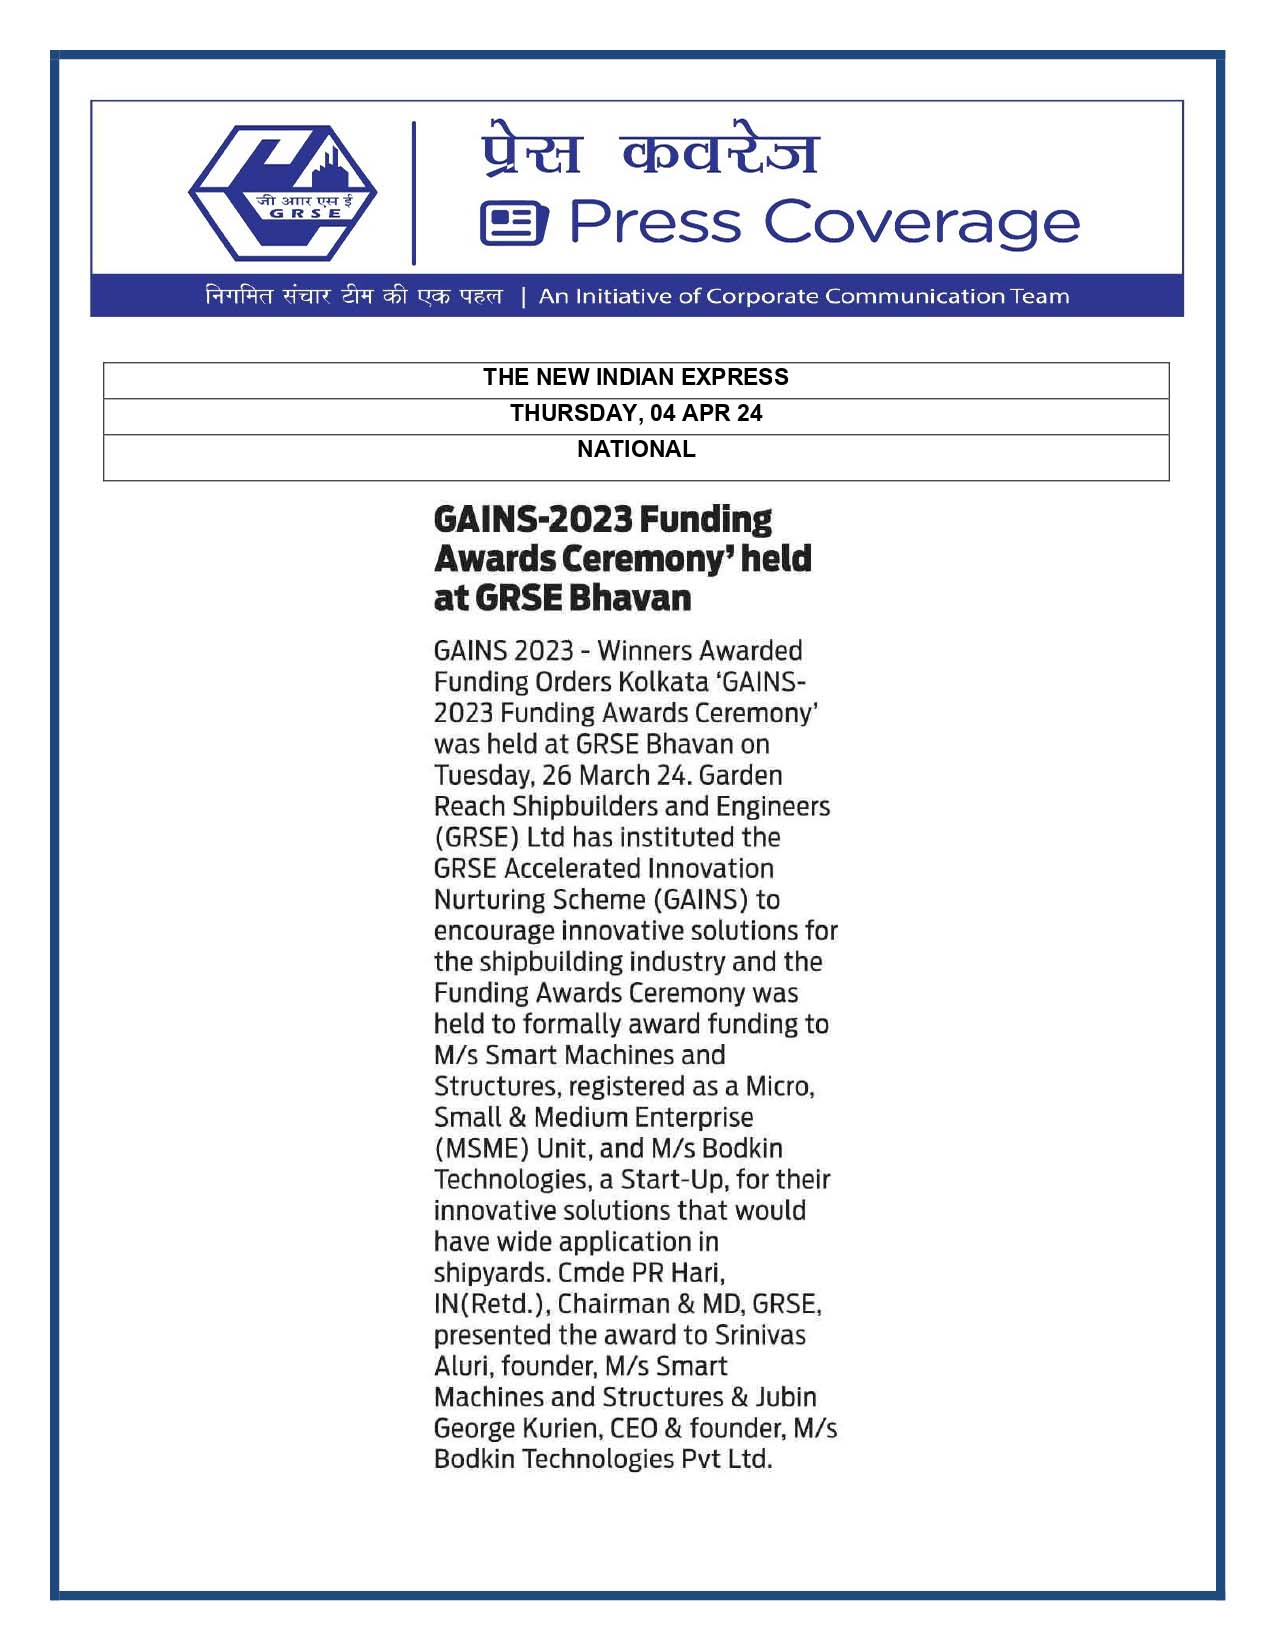 Press Coverage : The New Indian Express, 04 Apr 24 : GAINS 2023-Funding award ceremony held at GRSE Bhavan